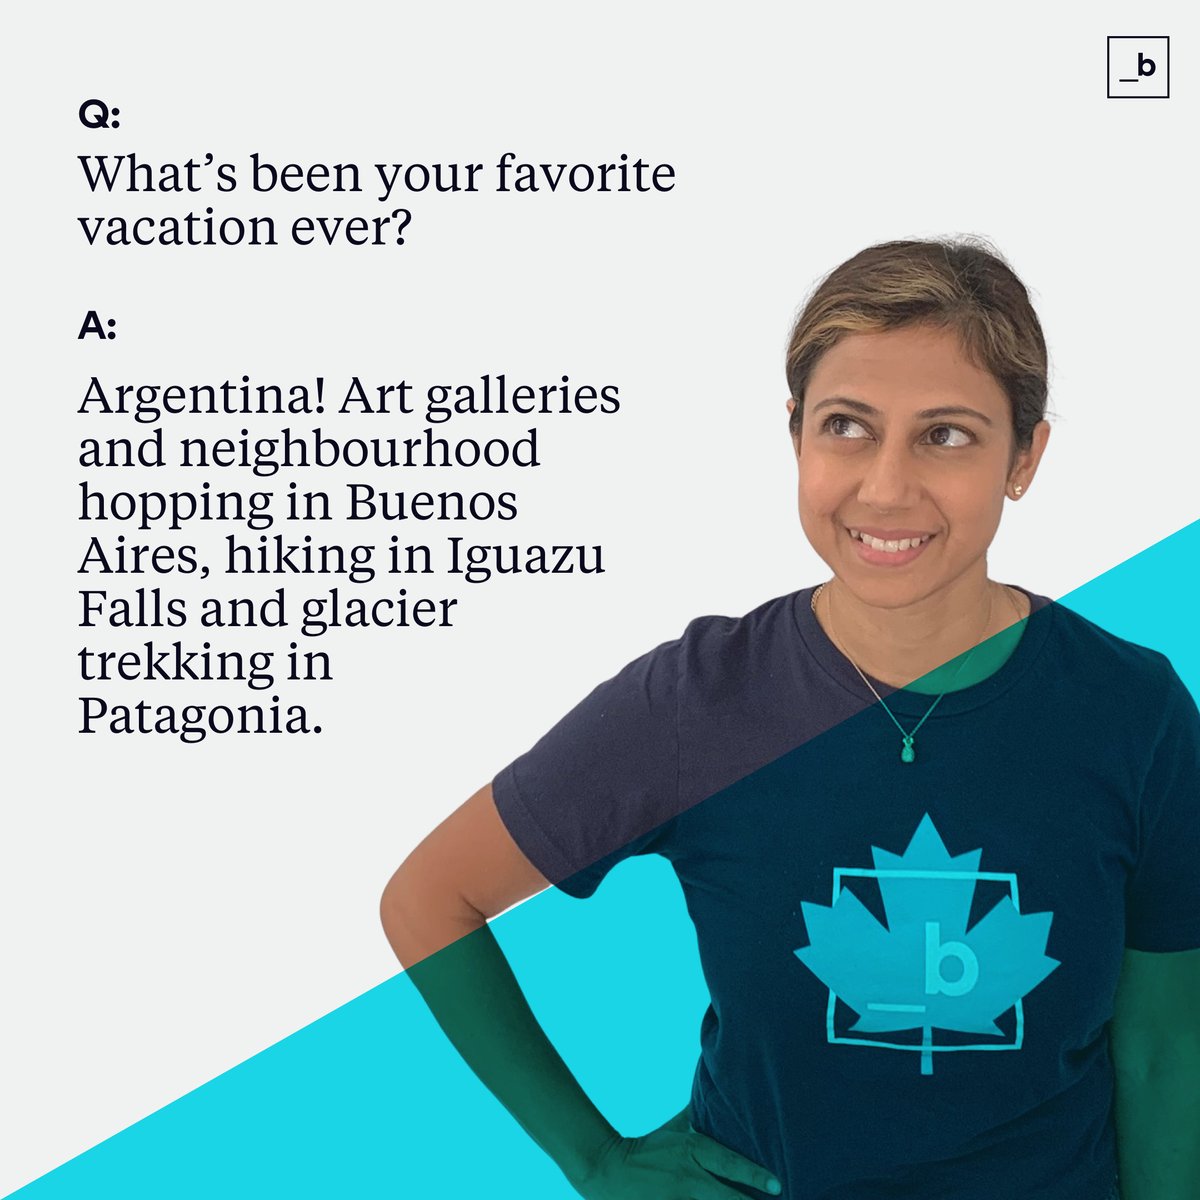 It's Meet a Builder time! Say hello to Yasneen Ashroff and learn what she loves about her hometown of Toronto – and about her favorite vacation spot. #BuildYourFuture